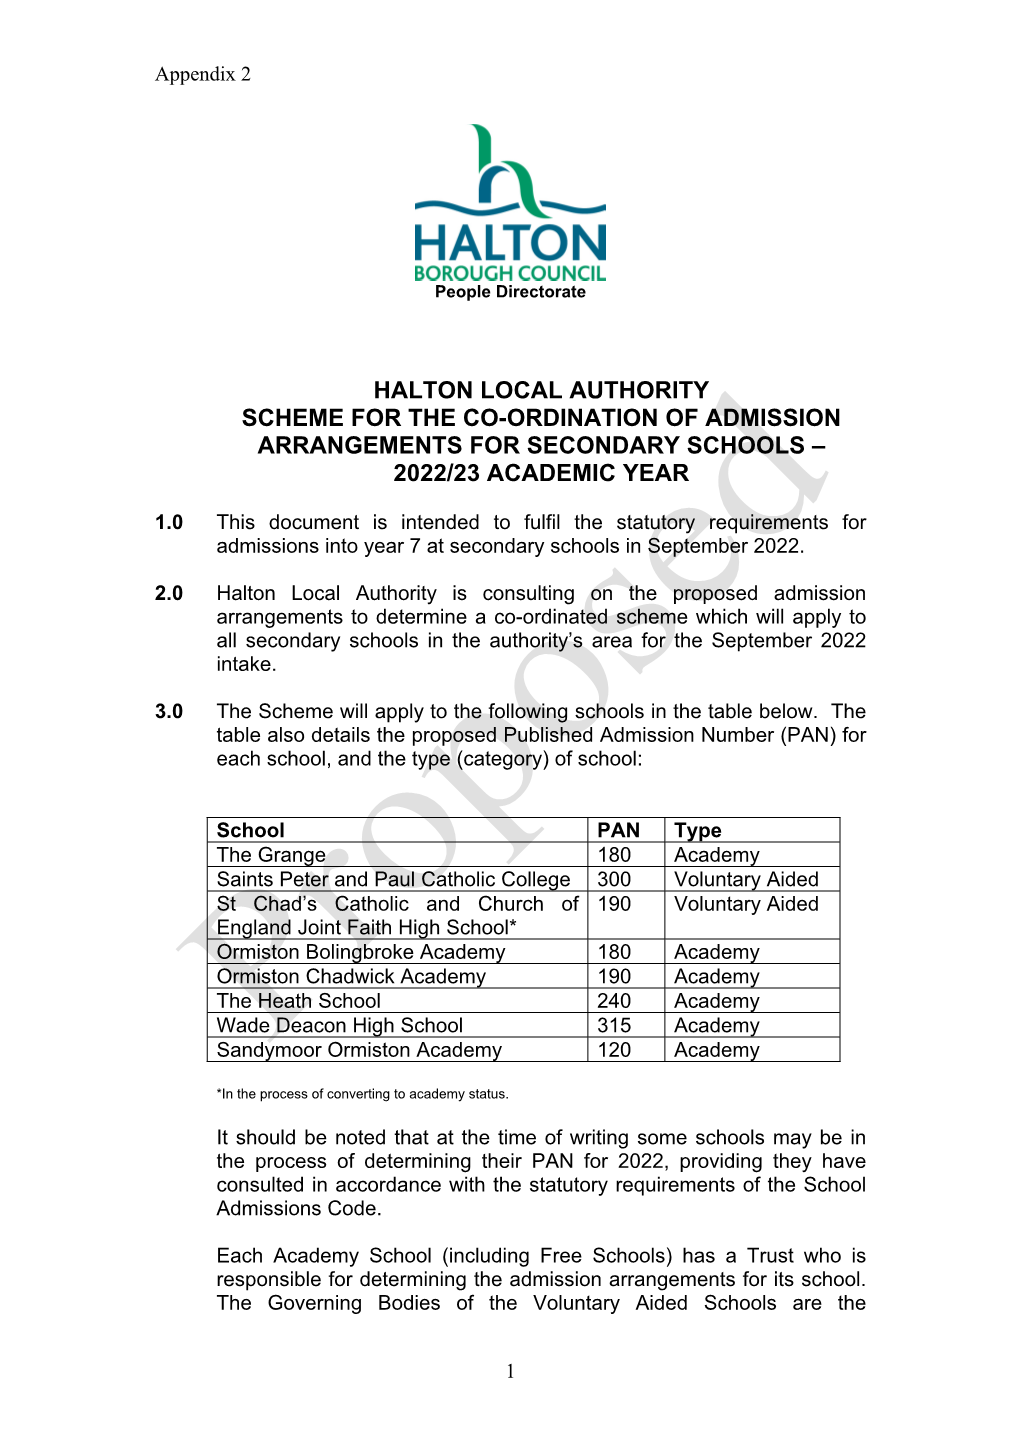 Halton Local Authority Scheme for the Co-Ordination of Admission Arrangements for Secondary Schools – 2022/23 Academic Year